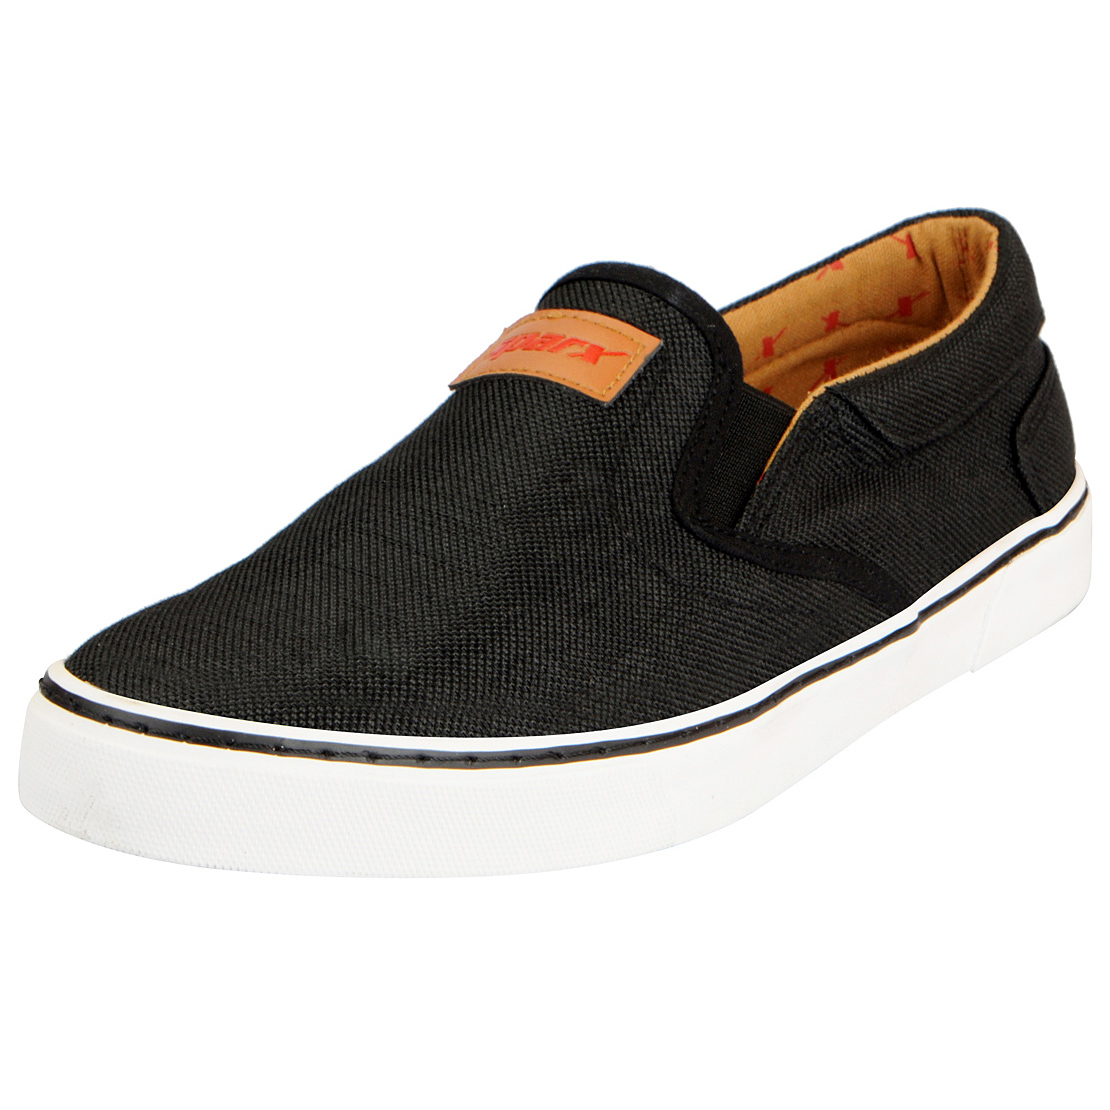 Buy Sparx Men's Black White Canvas Loafers Online @ ₹899 from ShopClues